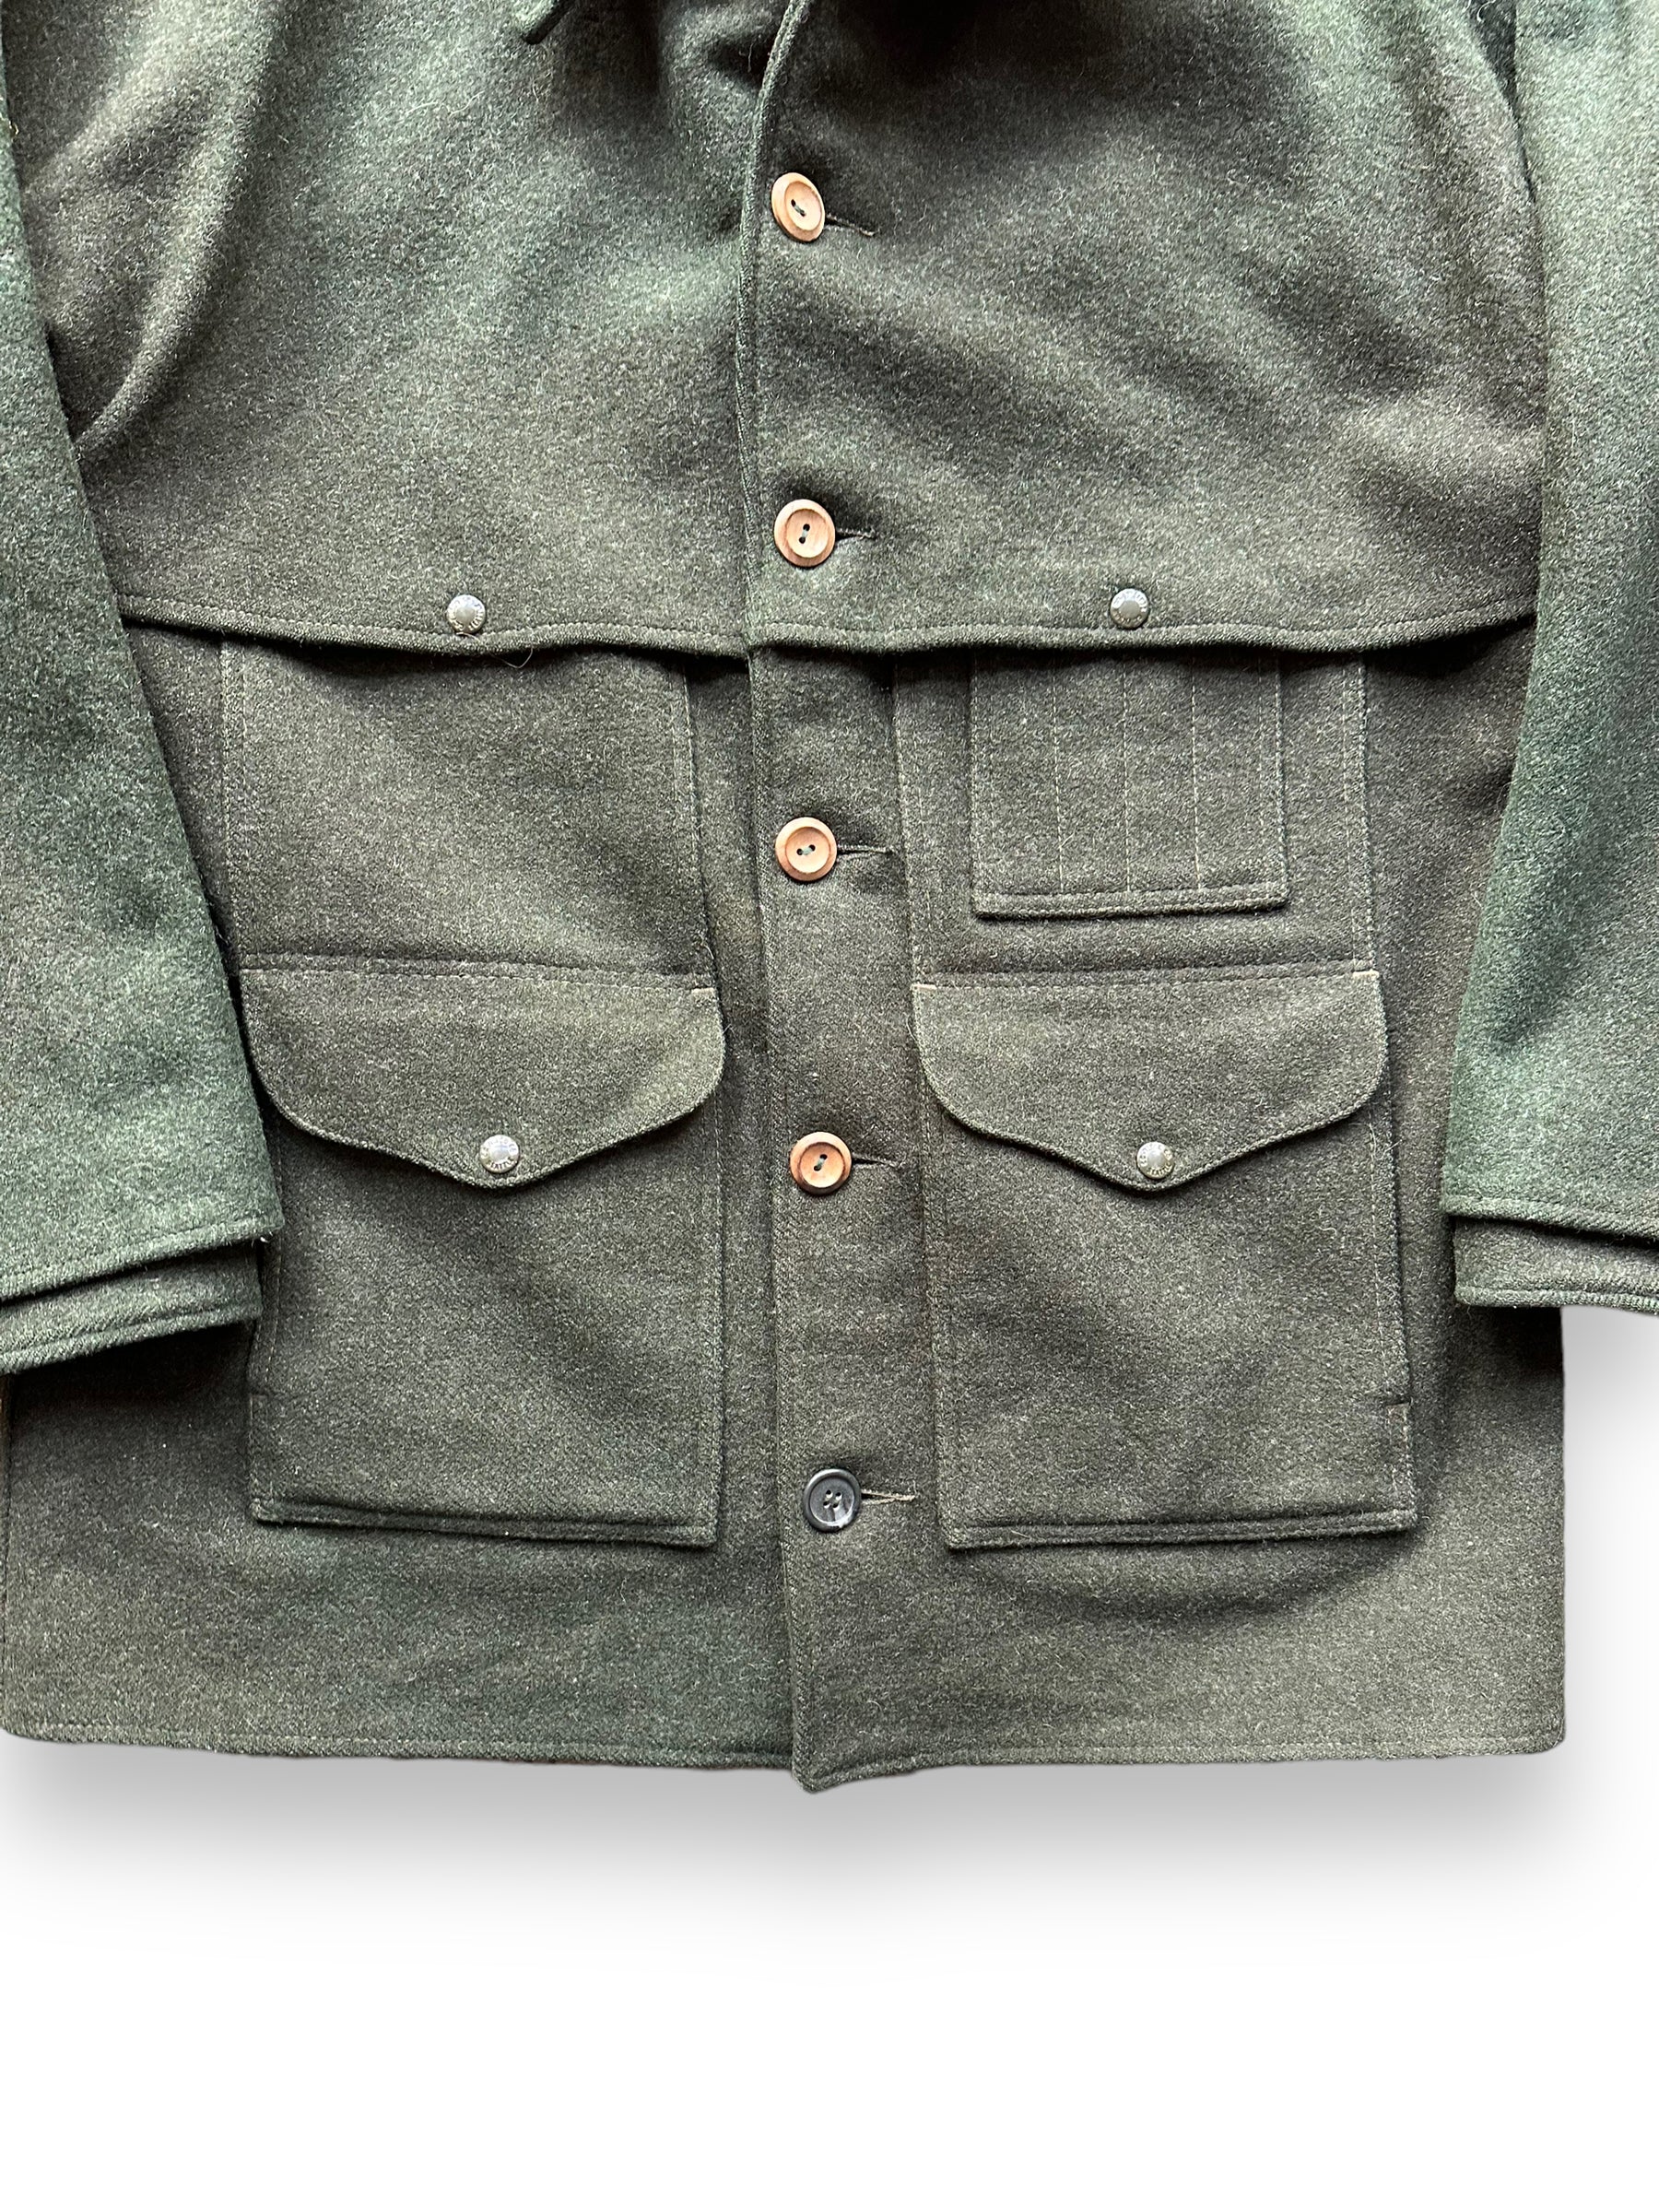 Lower Front Chest View on Vintage Filson Forest Green Double Mackinaw Cruiser SZ 46 XL |  Barn Owl Vintage Goods | Vintage Workwear Seattle